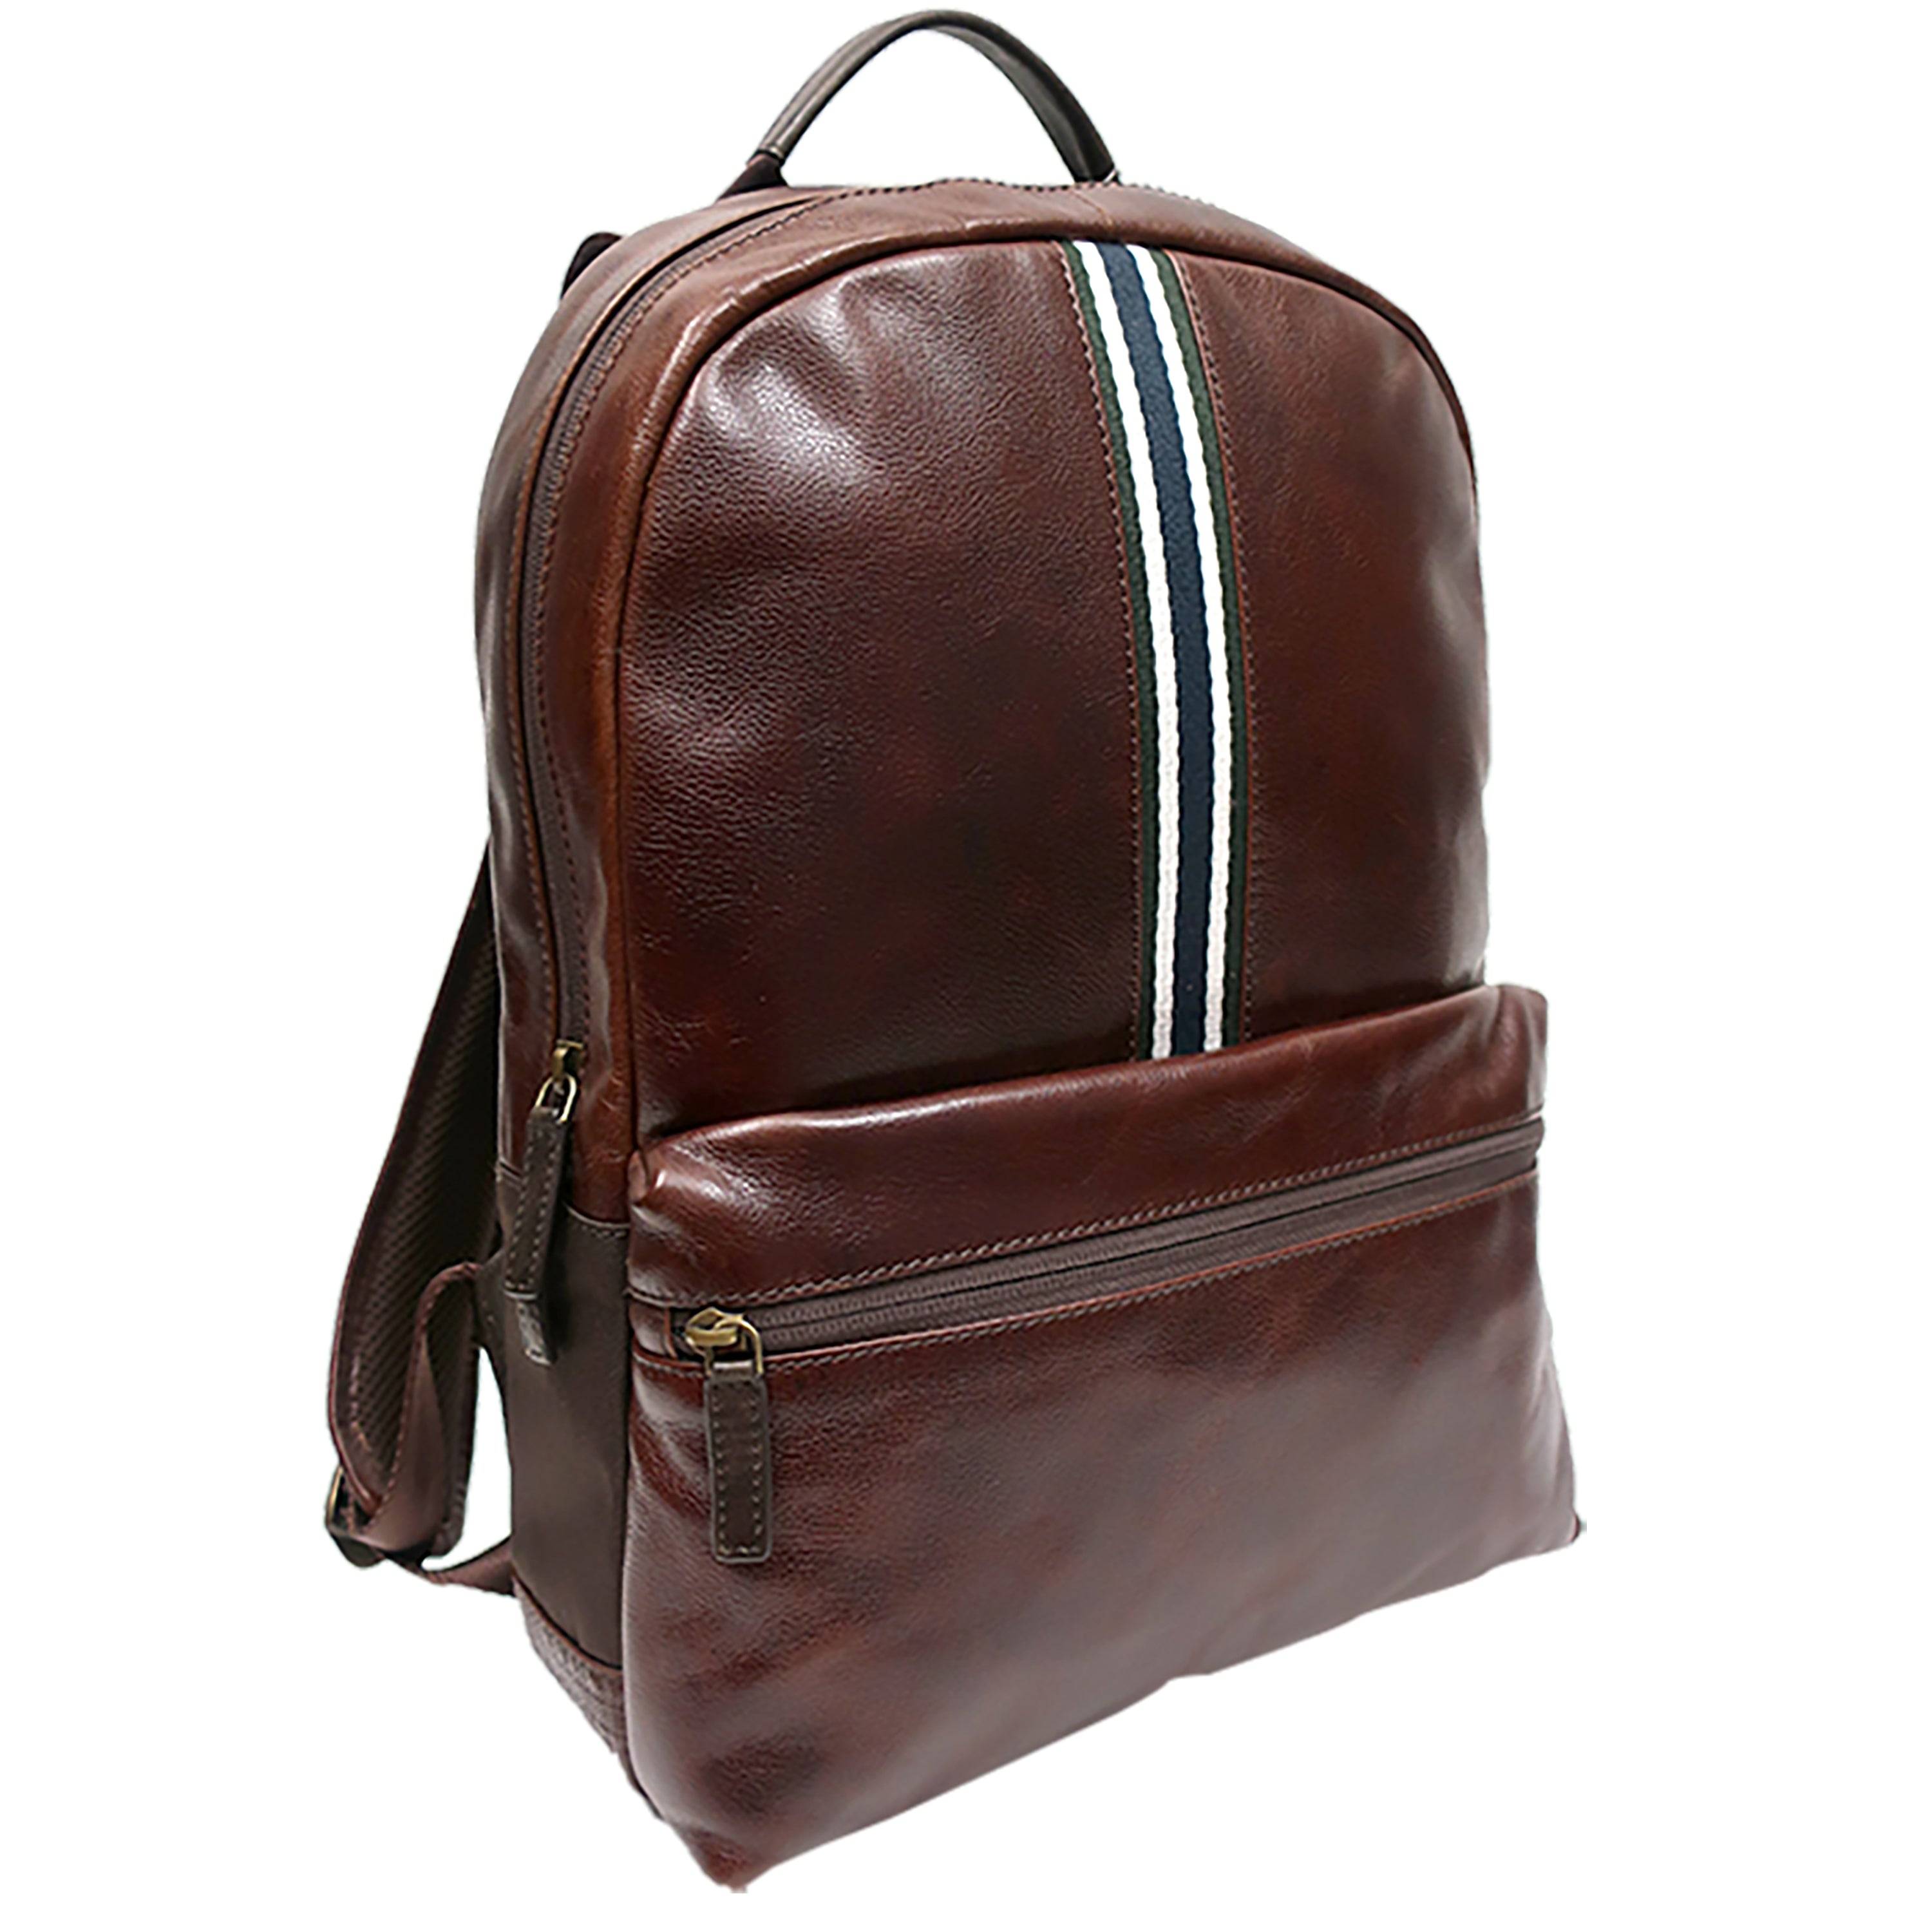 a brown leather backpack with a striped lining